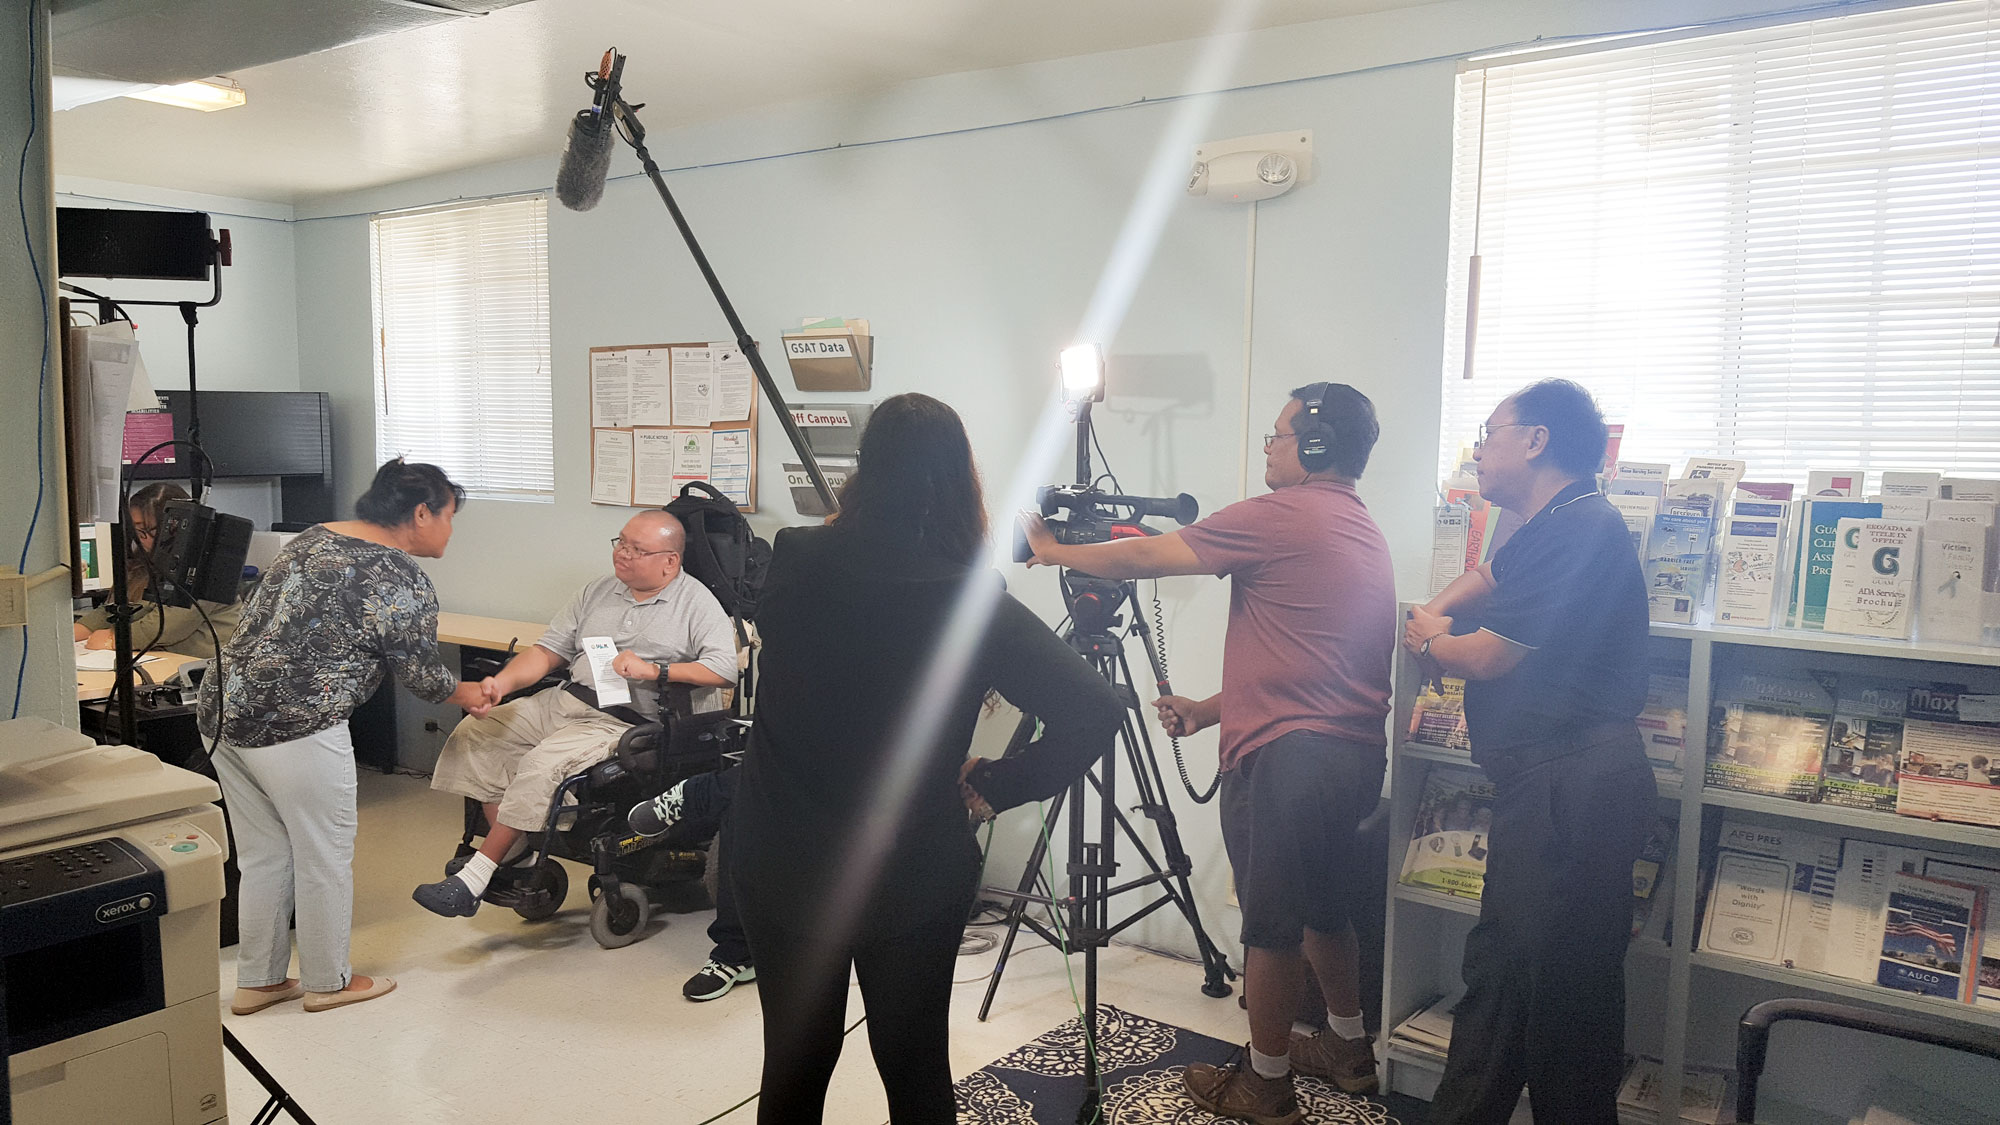 Bernadette Shisler, Guam CEDDERS, shakes the hand of Marlon Molinos, Self-Advocate, during the filming of Ta Fan Acomprendi Tip 5 on July 1. 